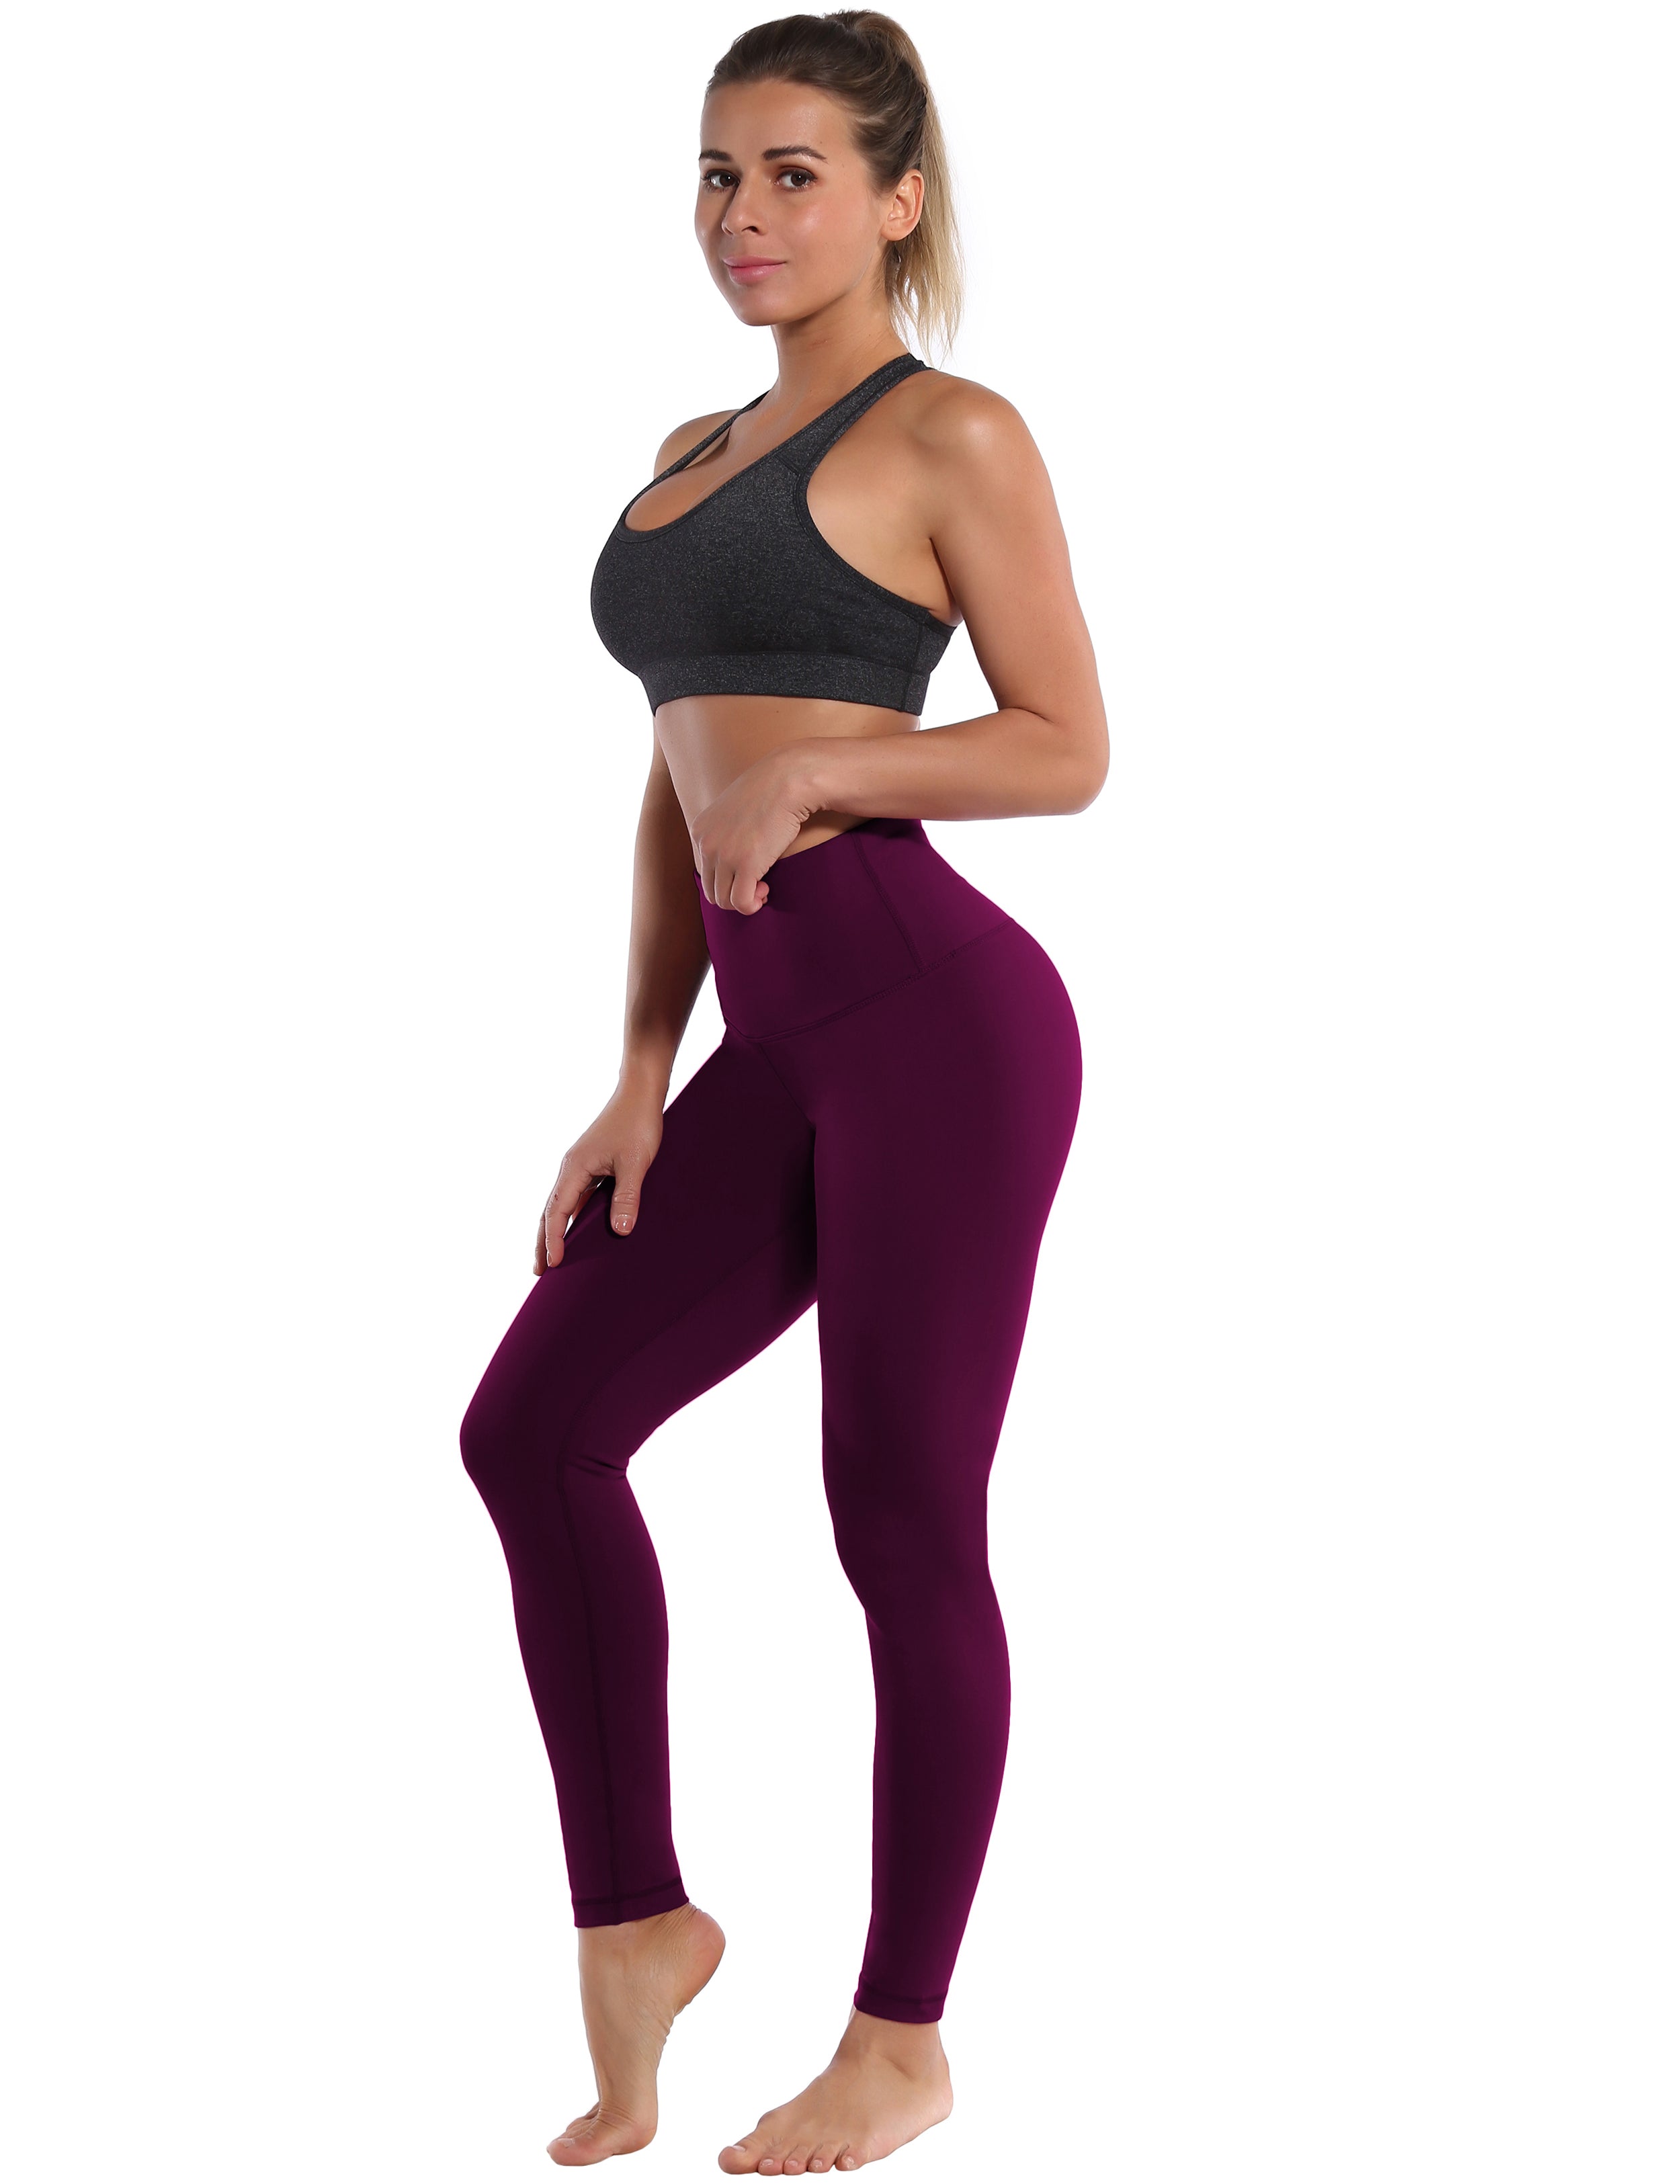 High Waist yogastudio Pants grapevine 75%Nylon/25%Spandex Fabric doesn't attract lint easily 4-way stretch No see-through Moisture-wicking Tummy control Inner pocket Four lengths